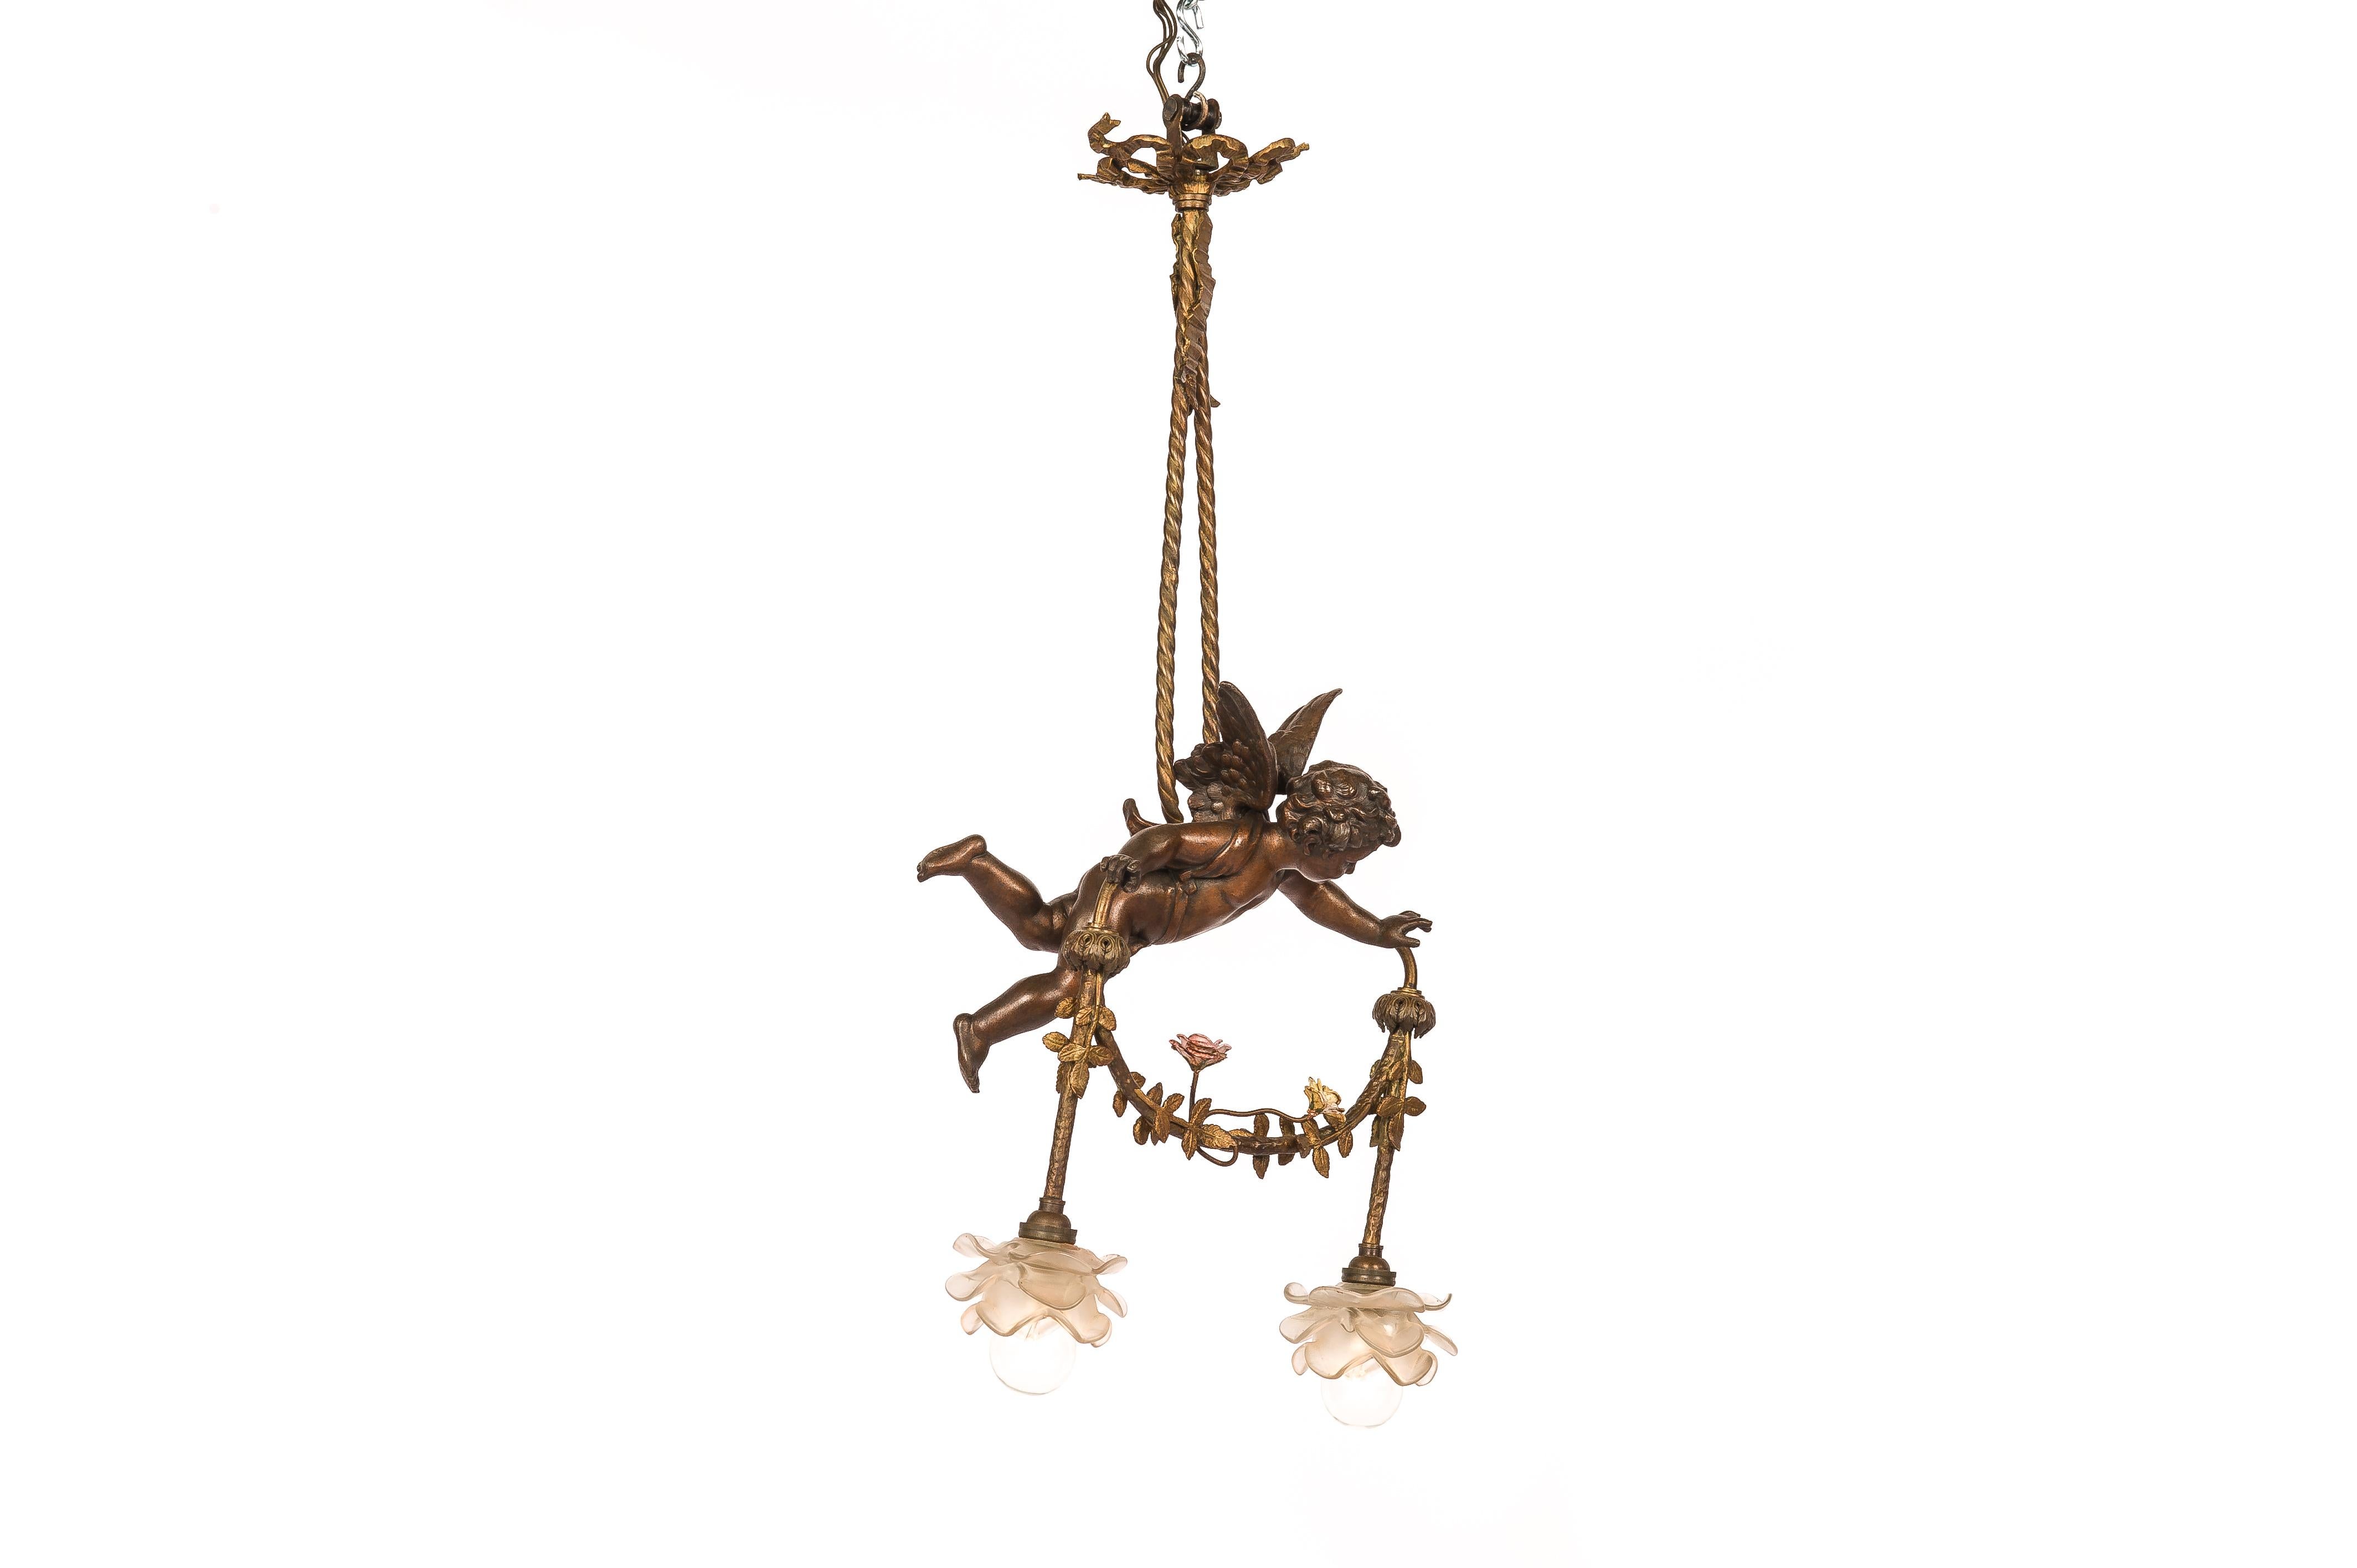 Antique 19th-Century French Brass Angel or Putti Pendant Light with Floral Garla 2